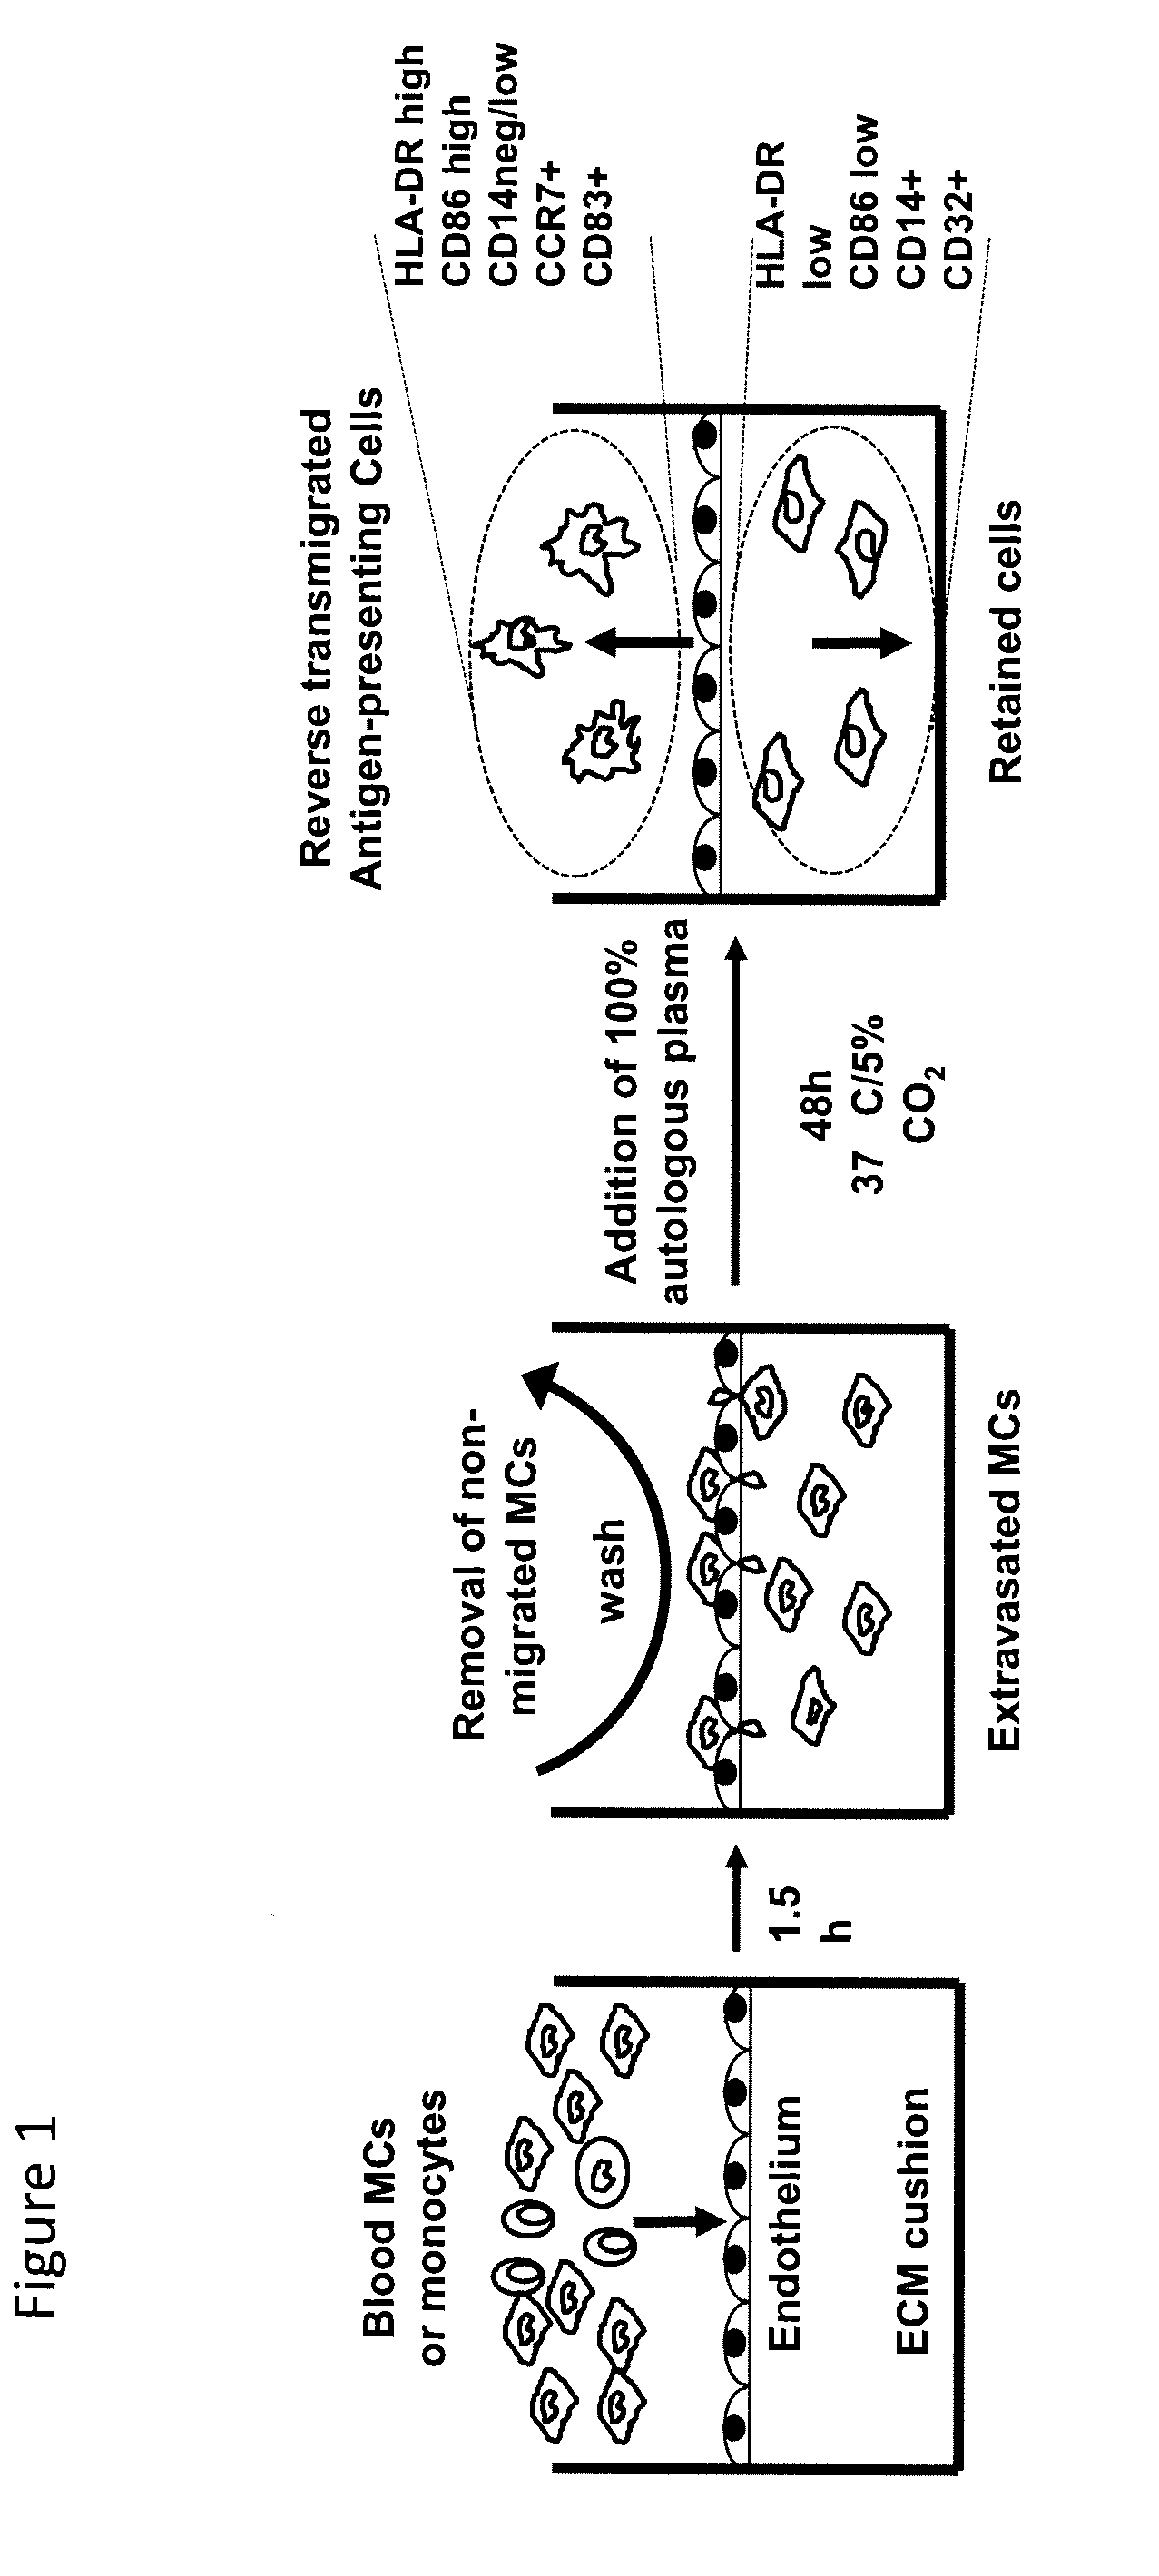 Tissue constructs and uses thereof